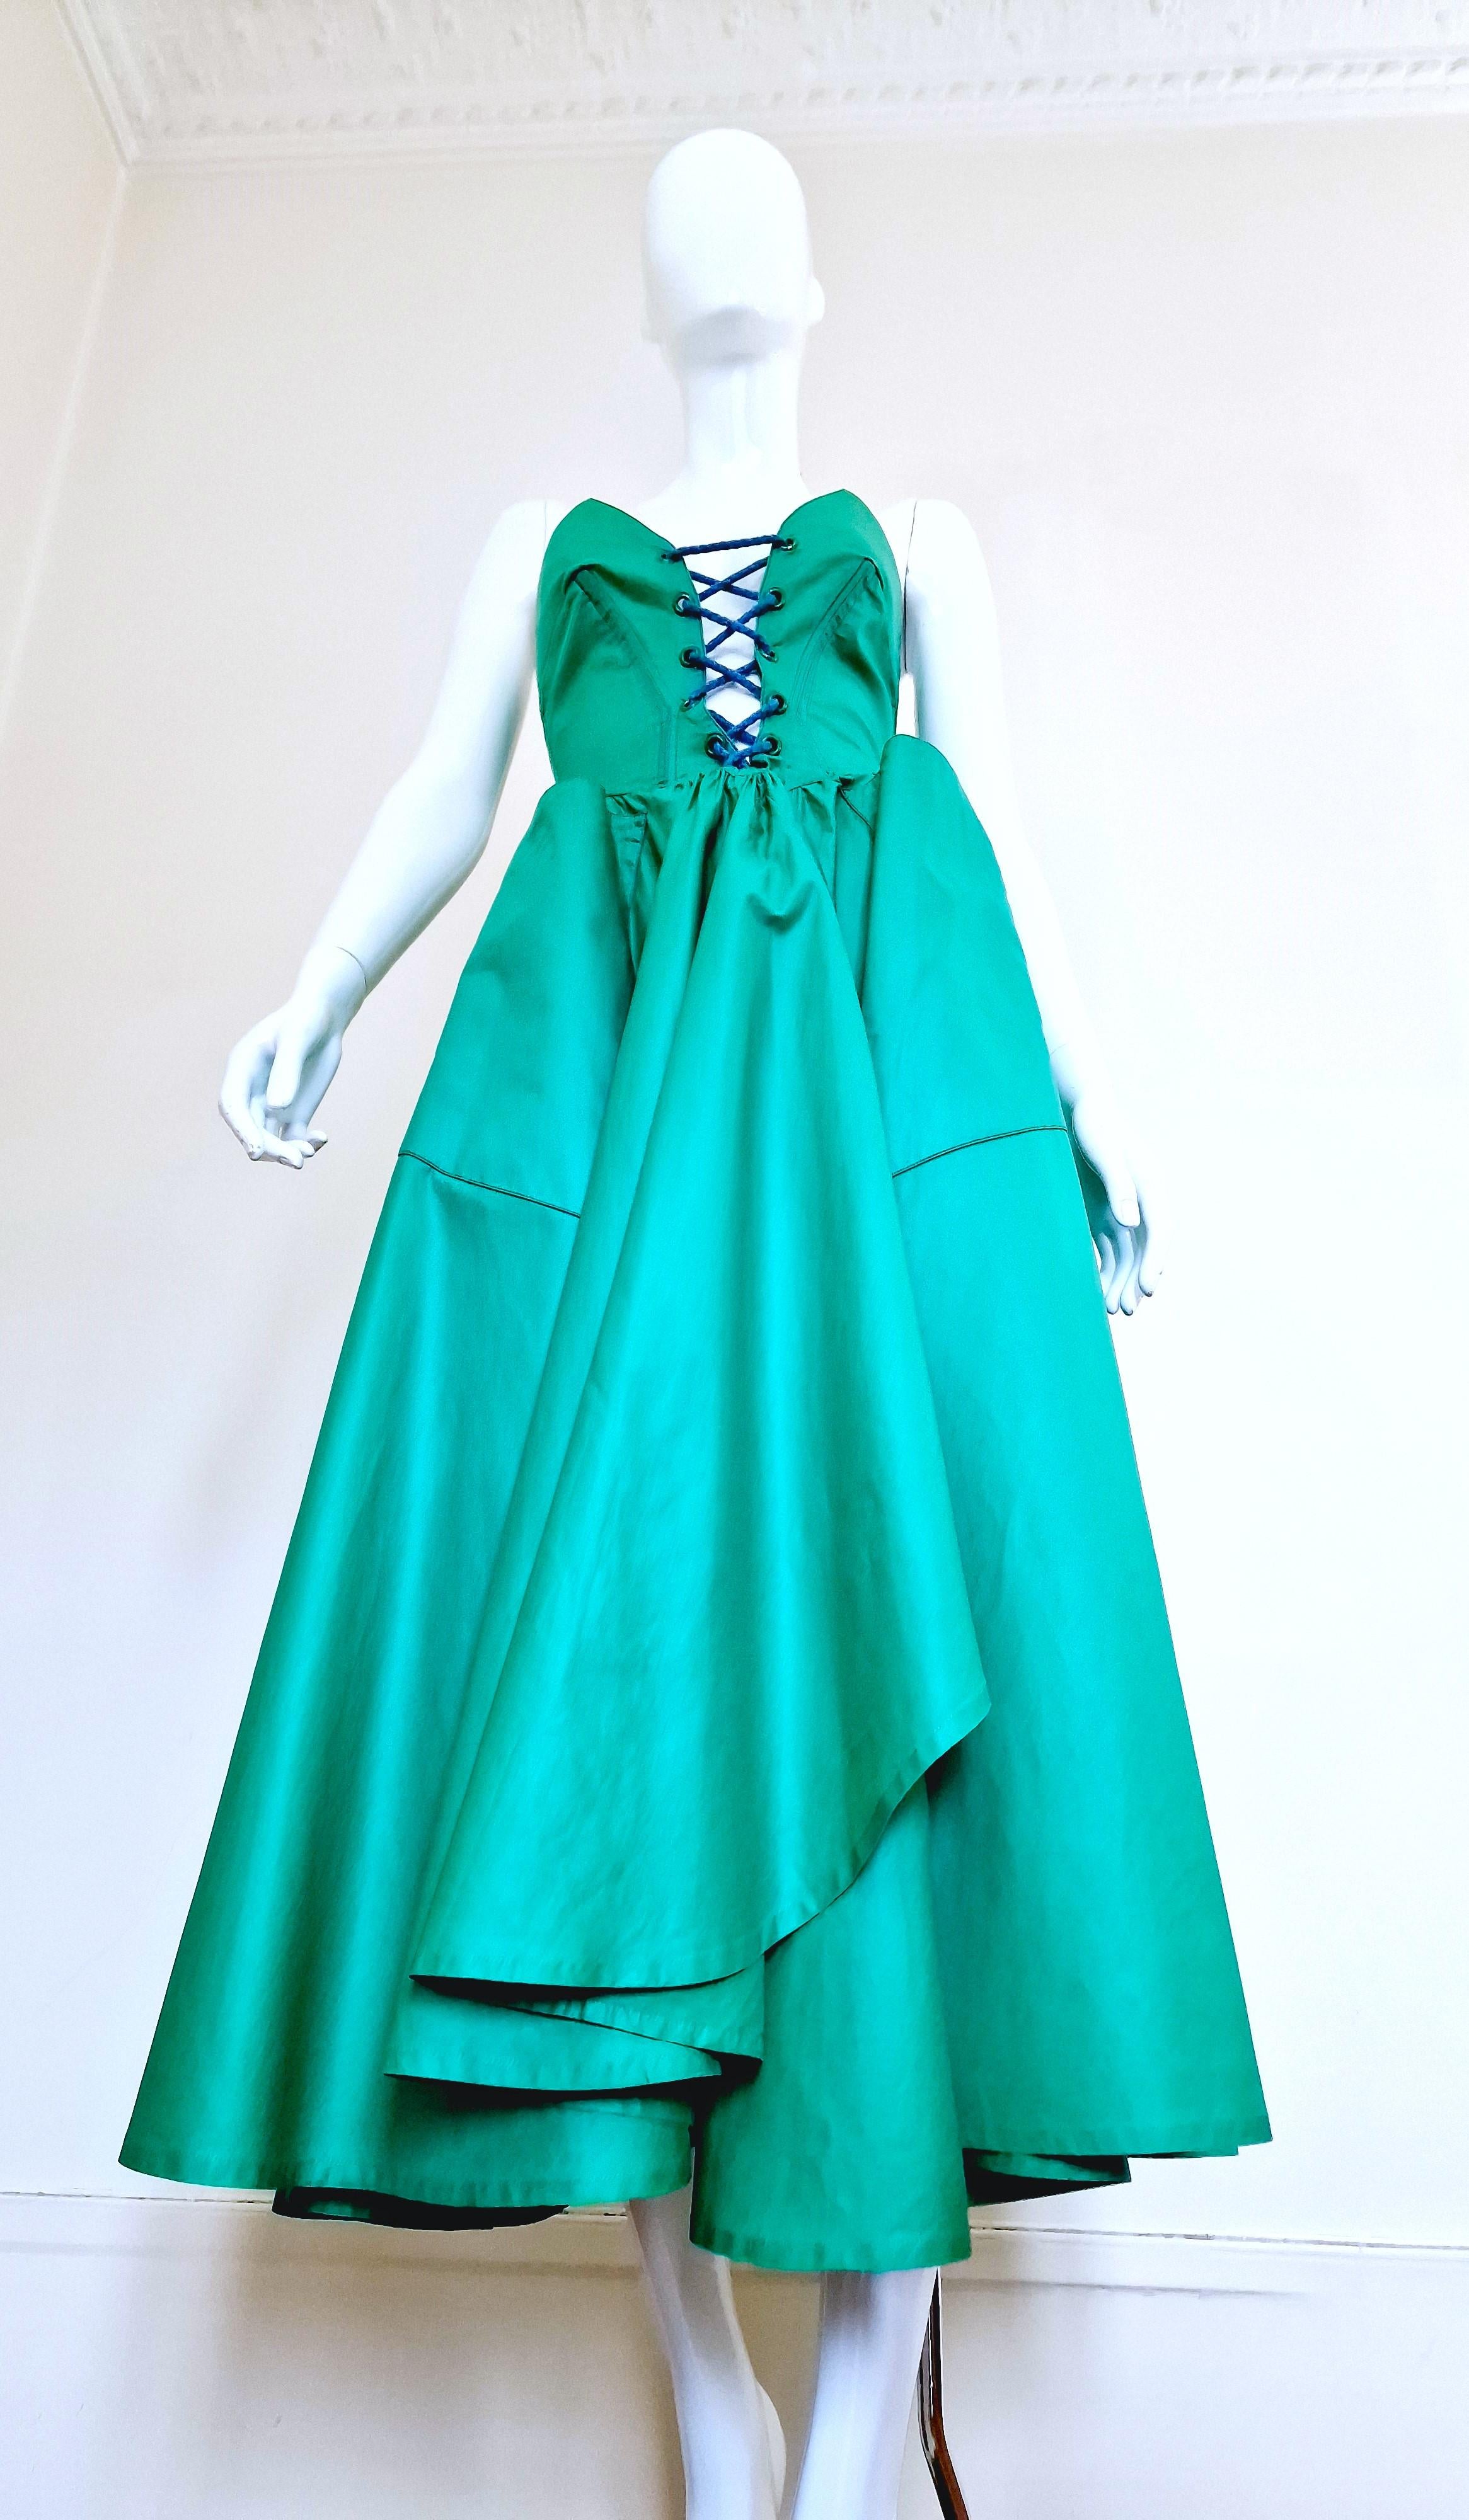 Thierry Mugler Corset Lace Up Green Vintage Couture Gown Prom Bustier Dress en vente 11